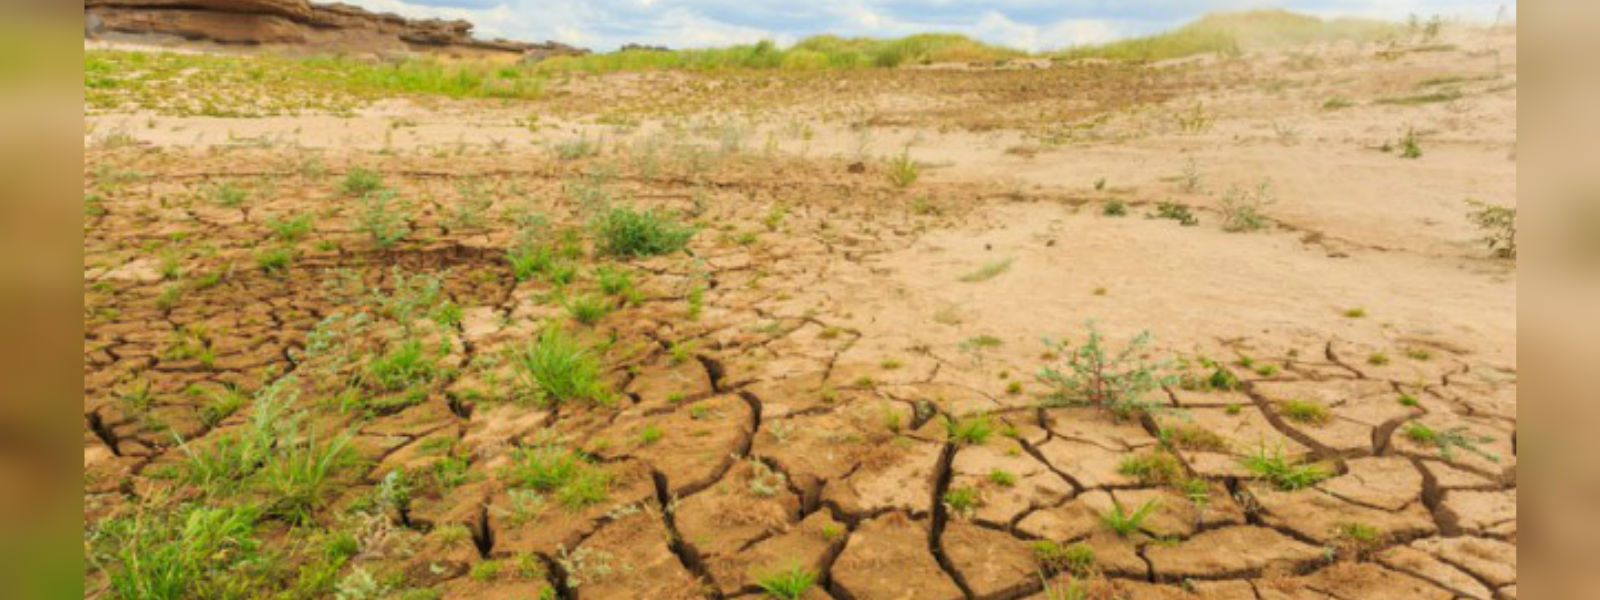 Over 279,000 people affected by dry weather